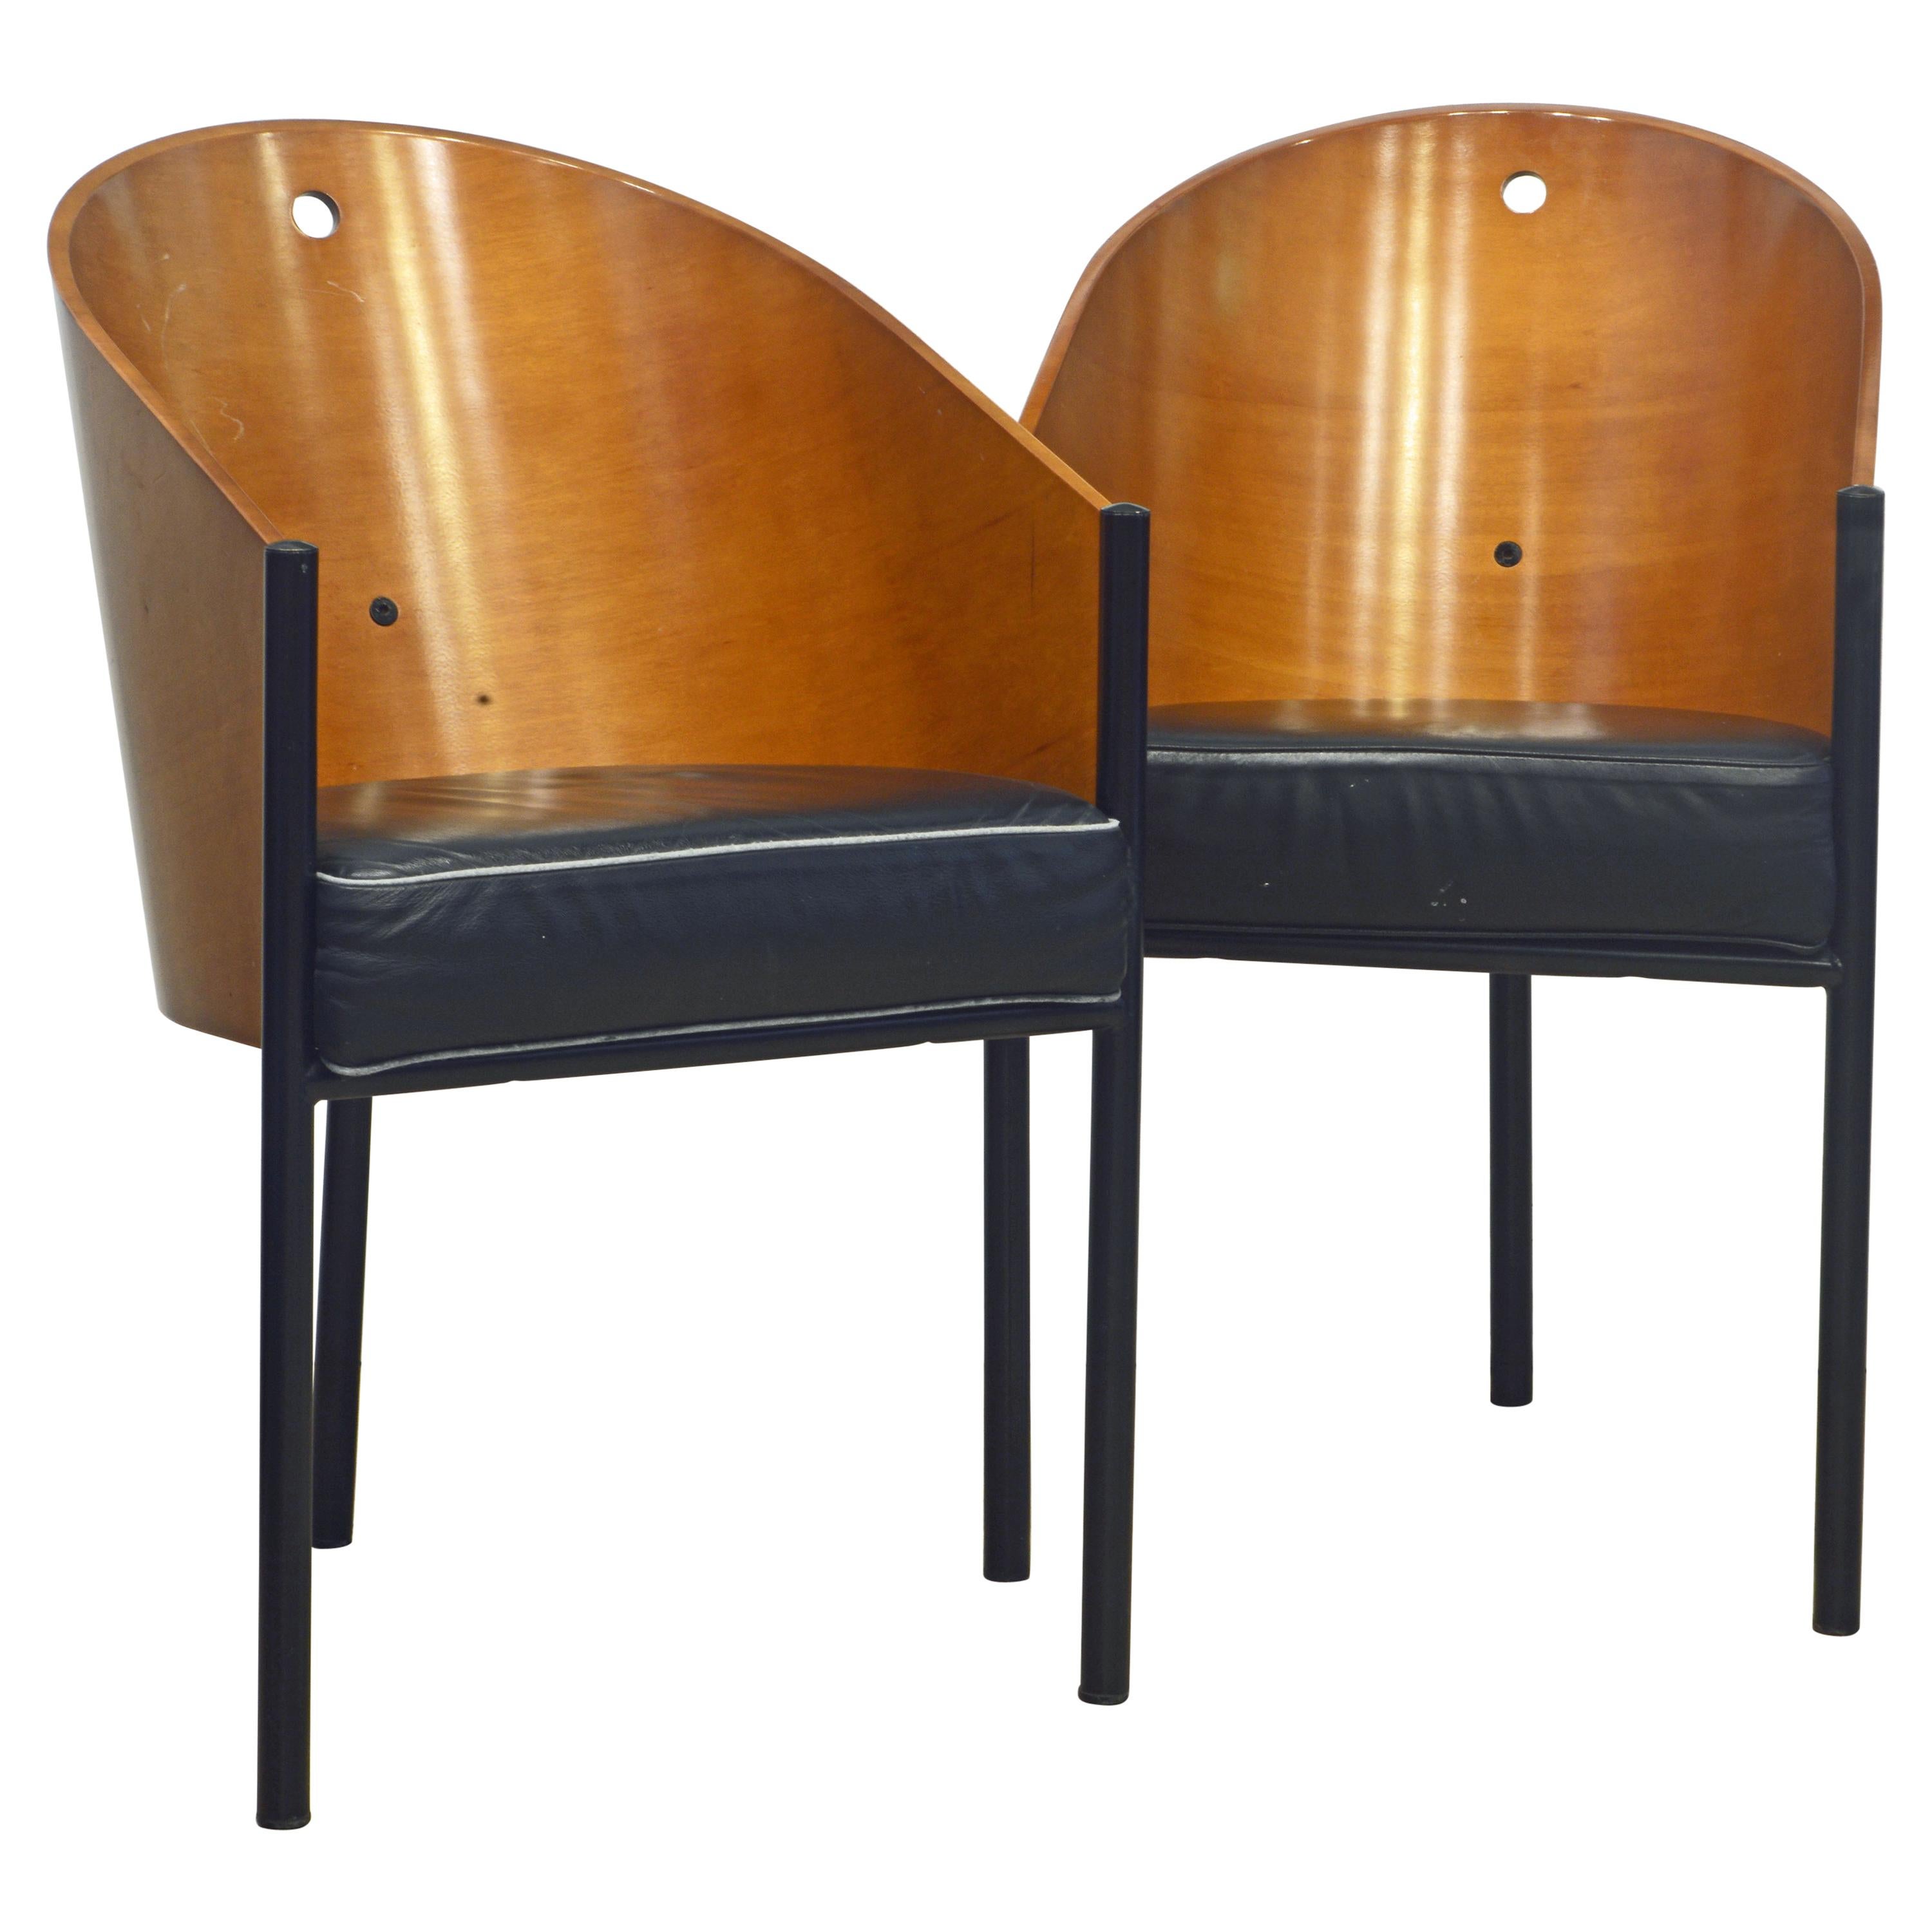 Pair of Leather Covered Costes Armchairs by Philippe Starck for Driade, Italy